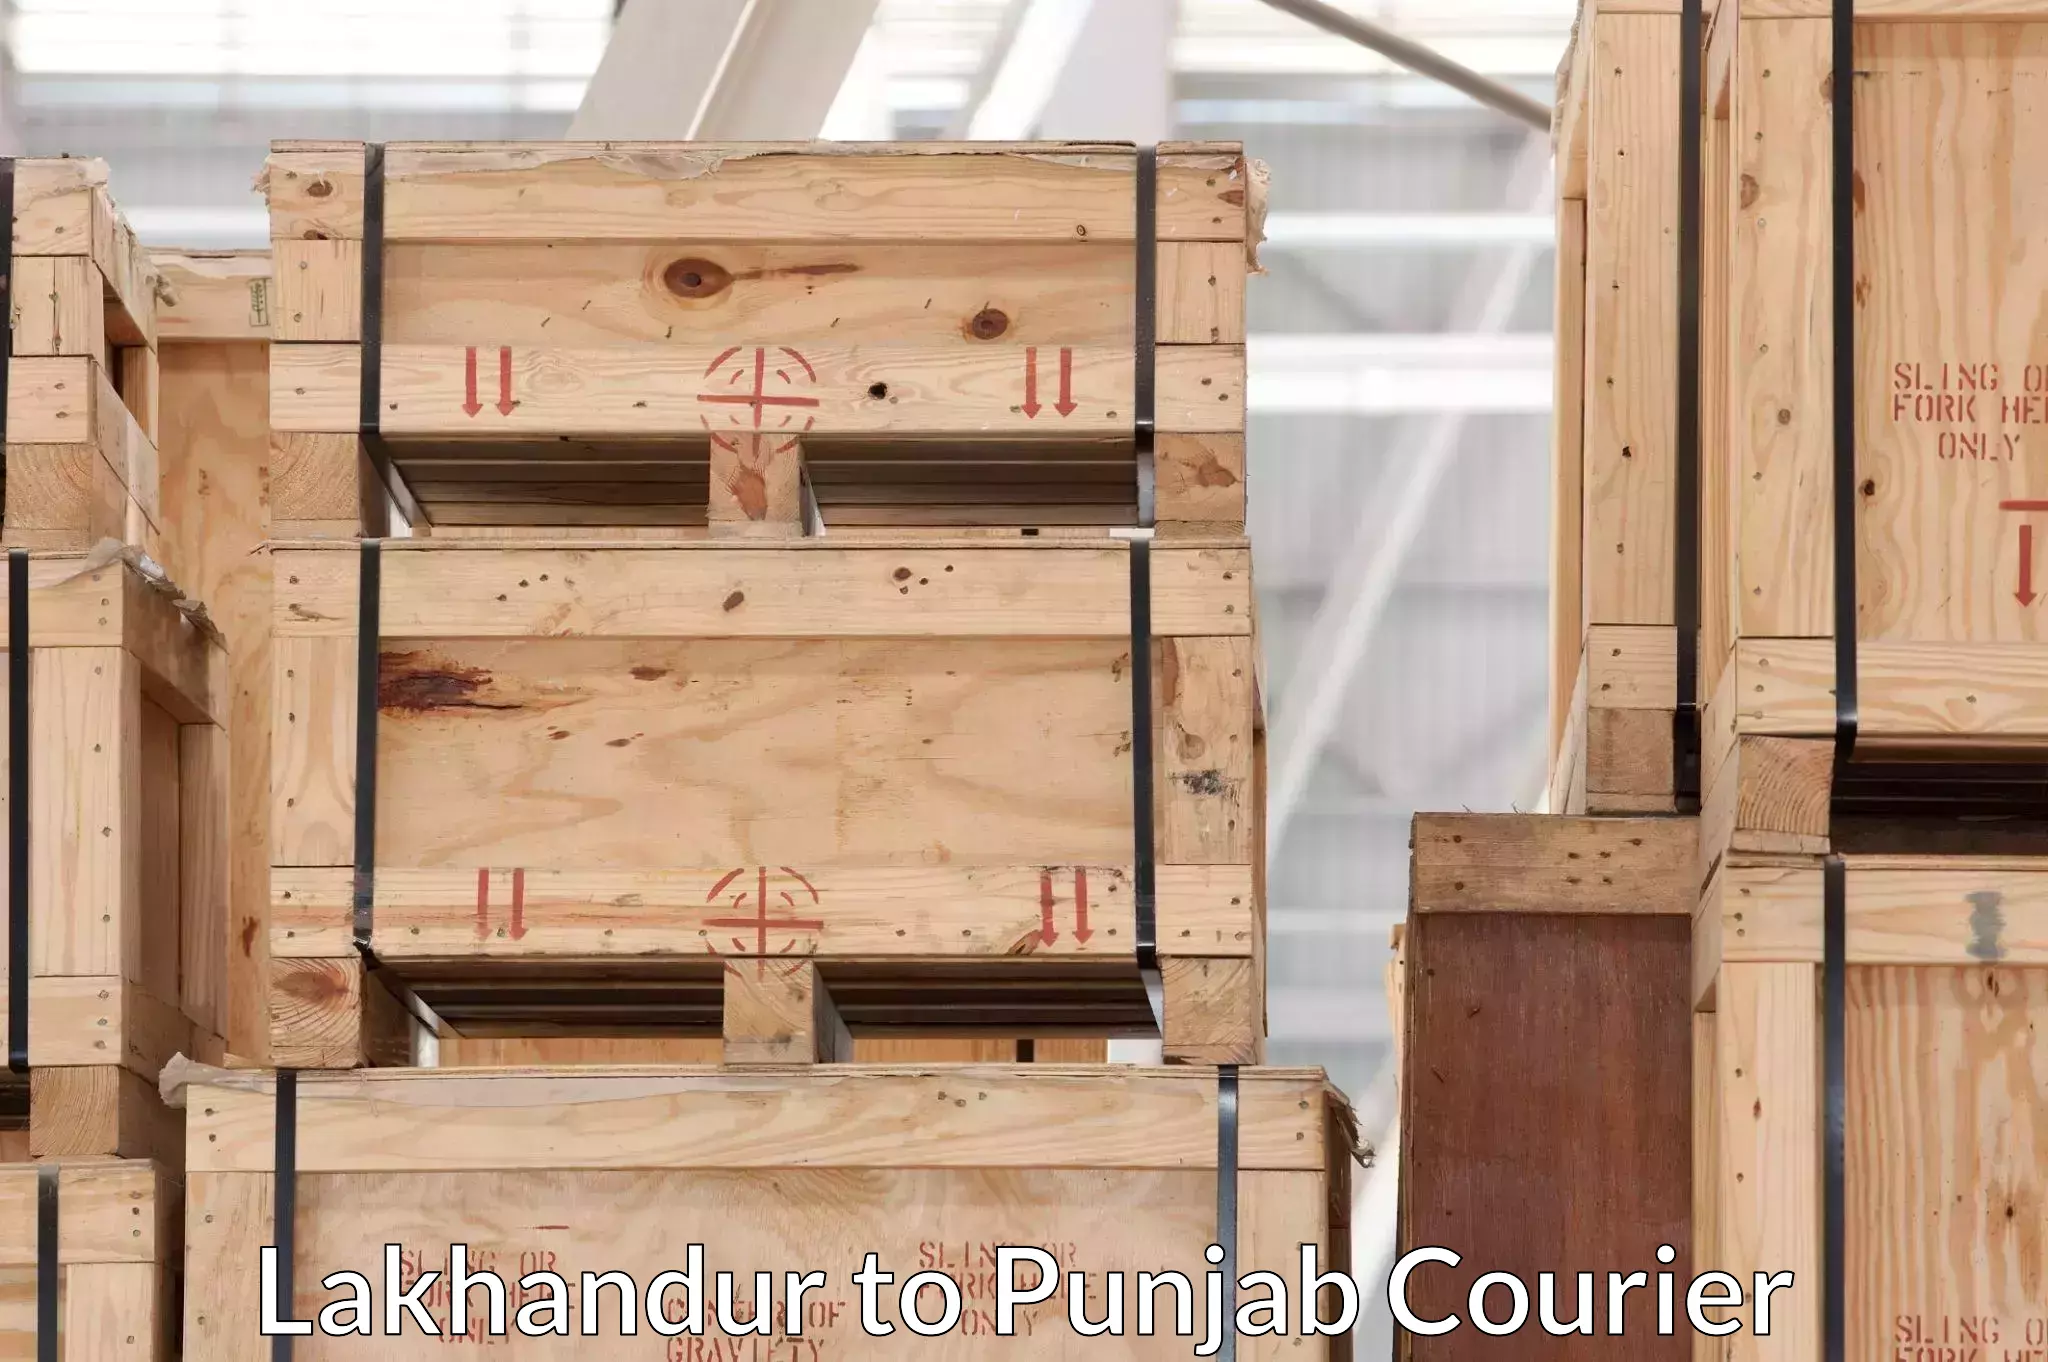 Moving and handling services Lakhandur to Punjab